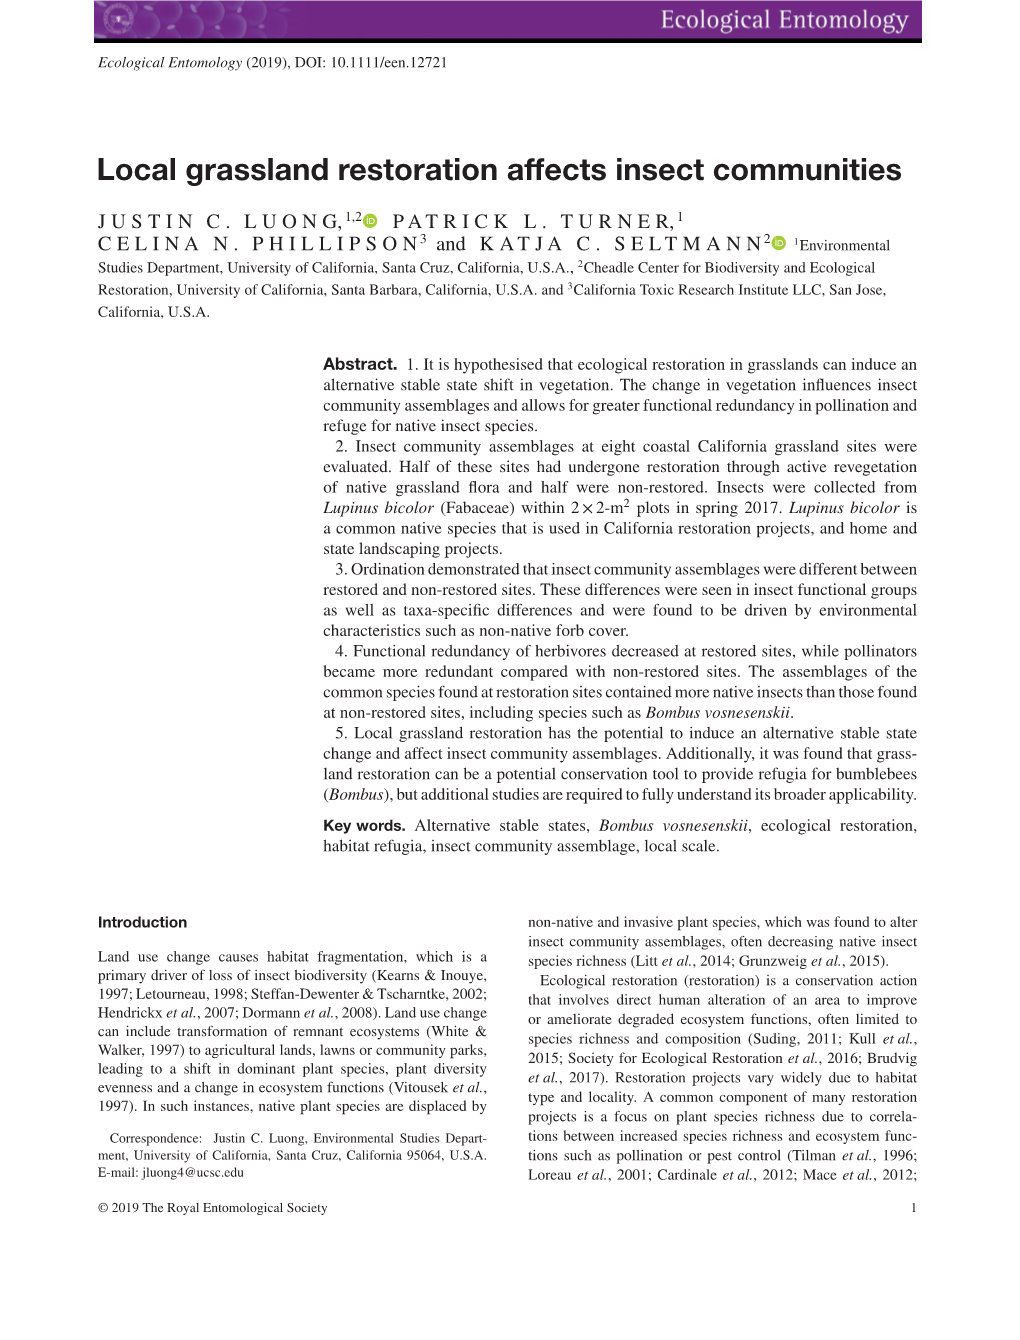 Local Grassland Restoration Affects Insect Communities